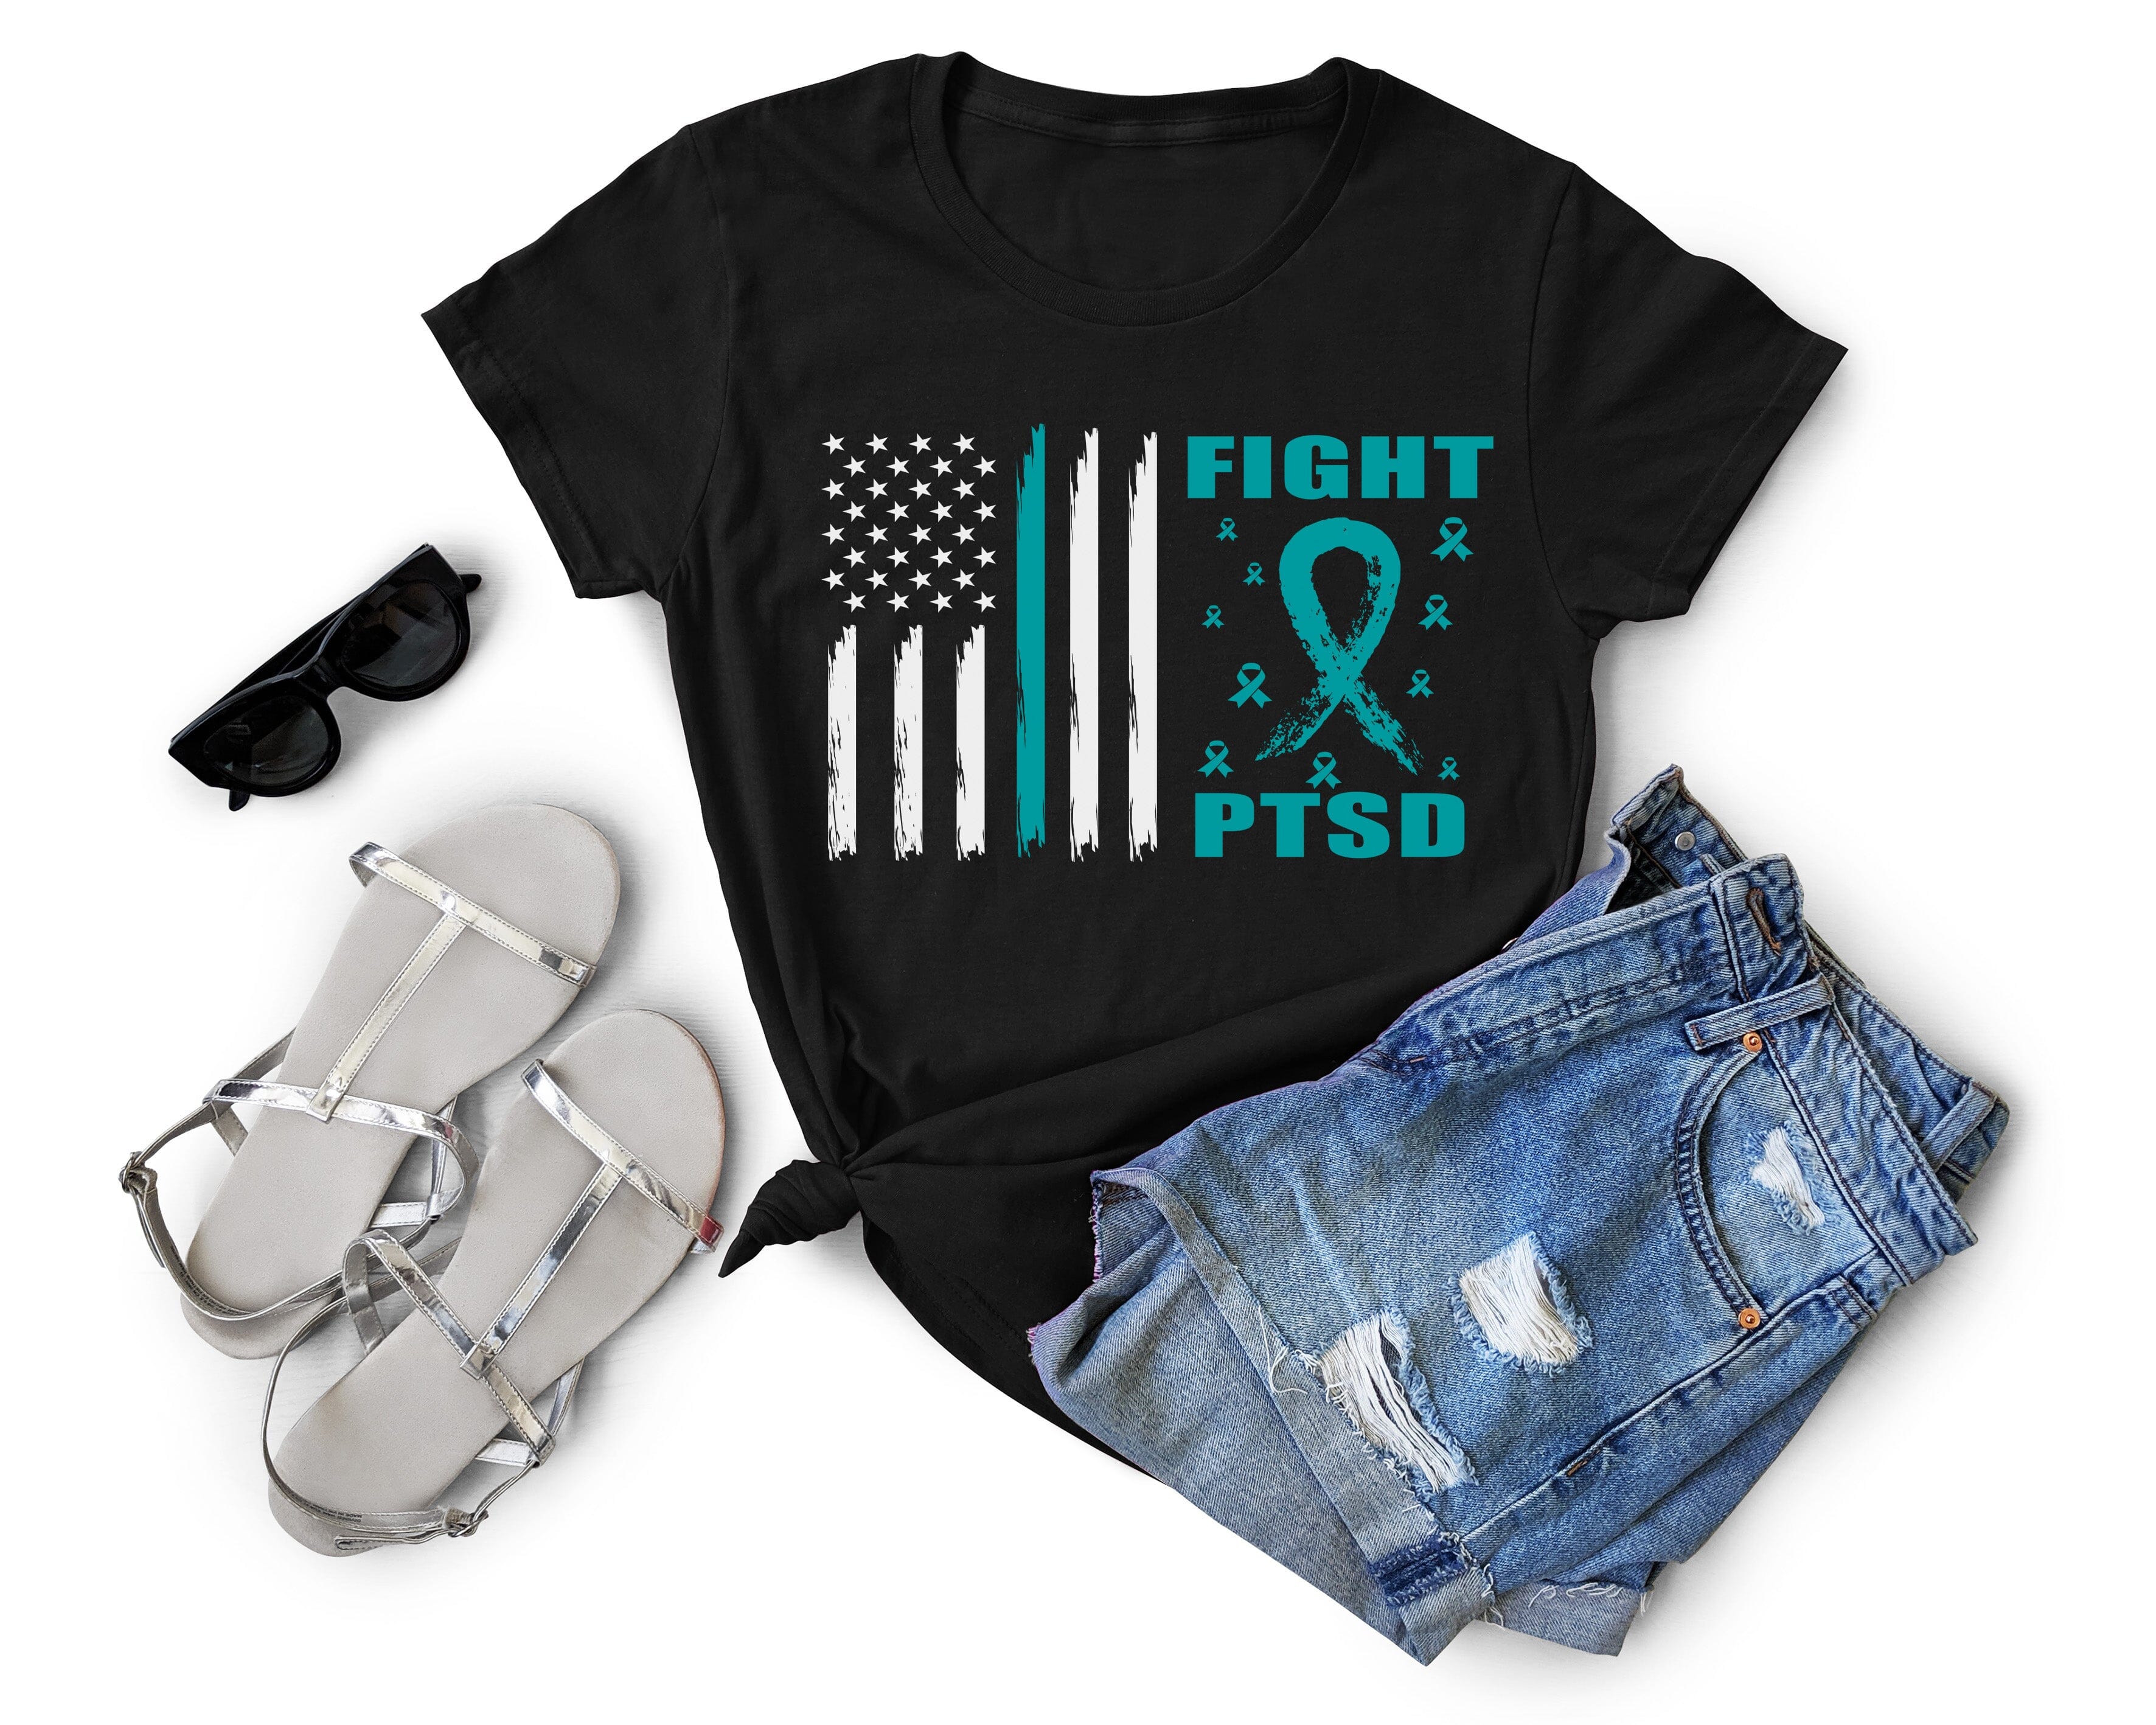 Ptsd support T-shirt Gravesfamilycreations